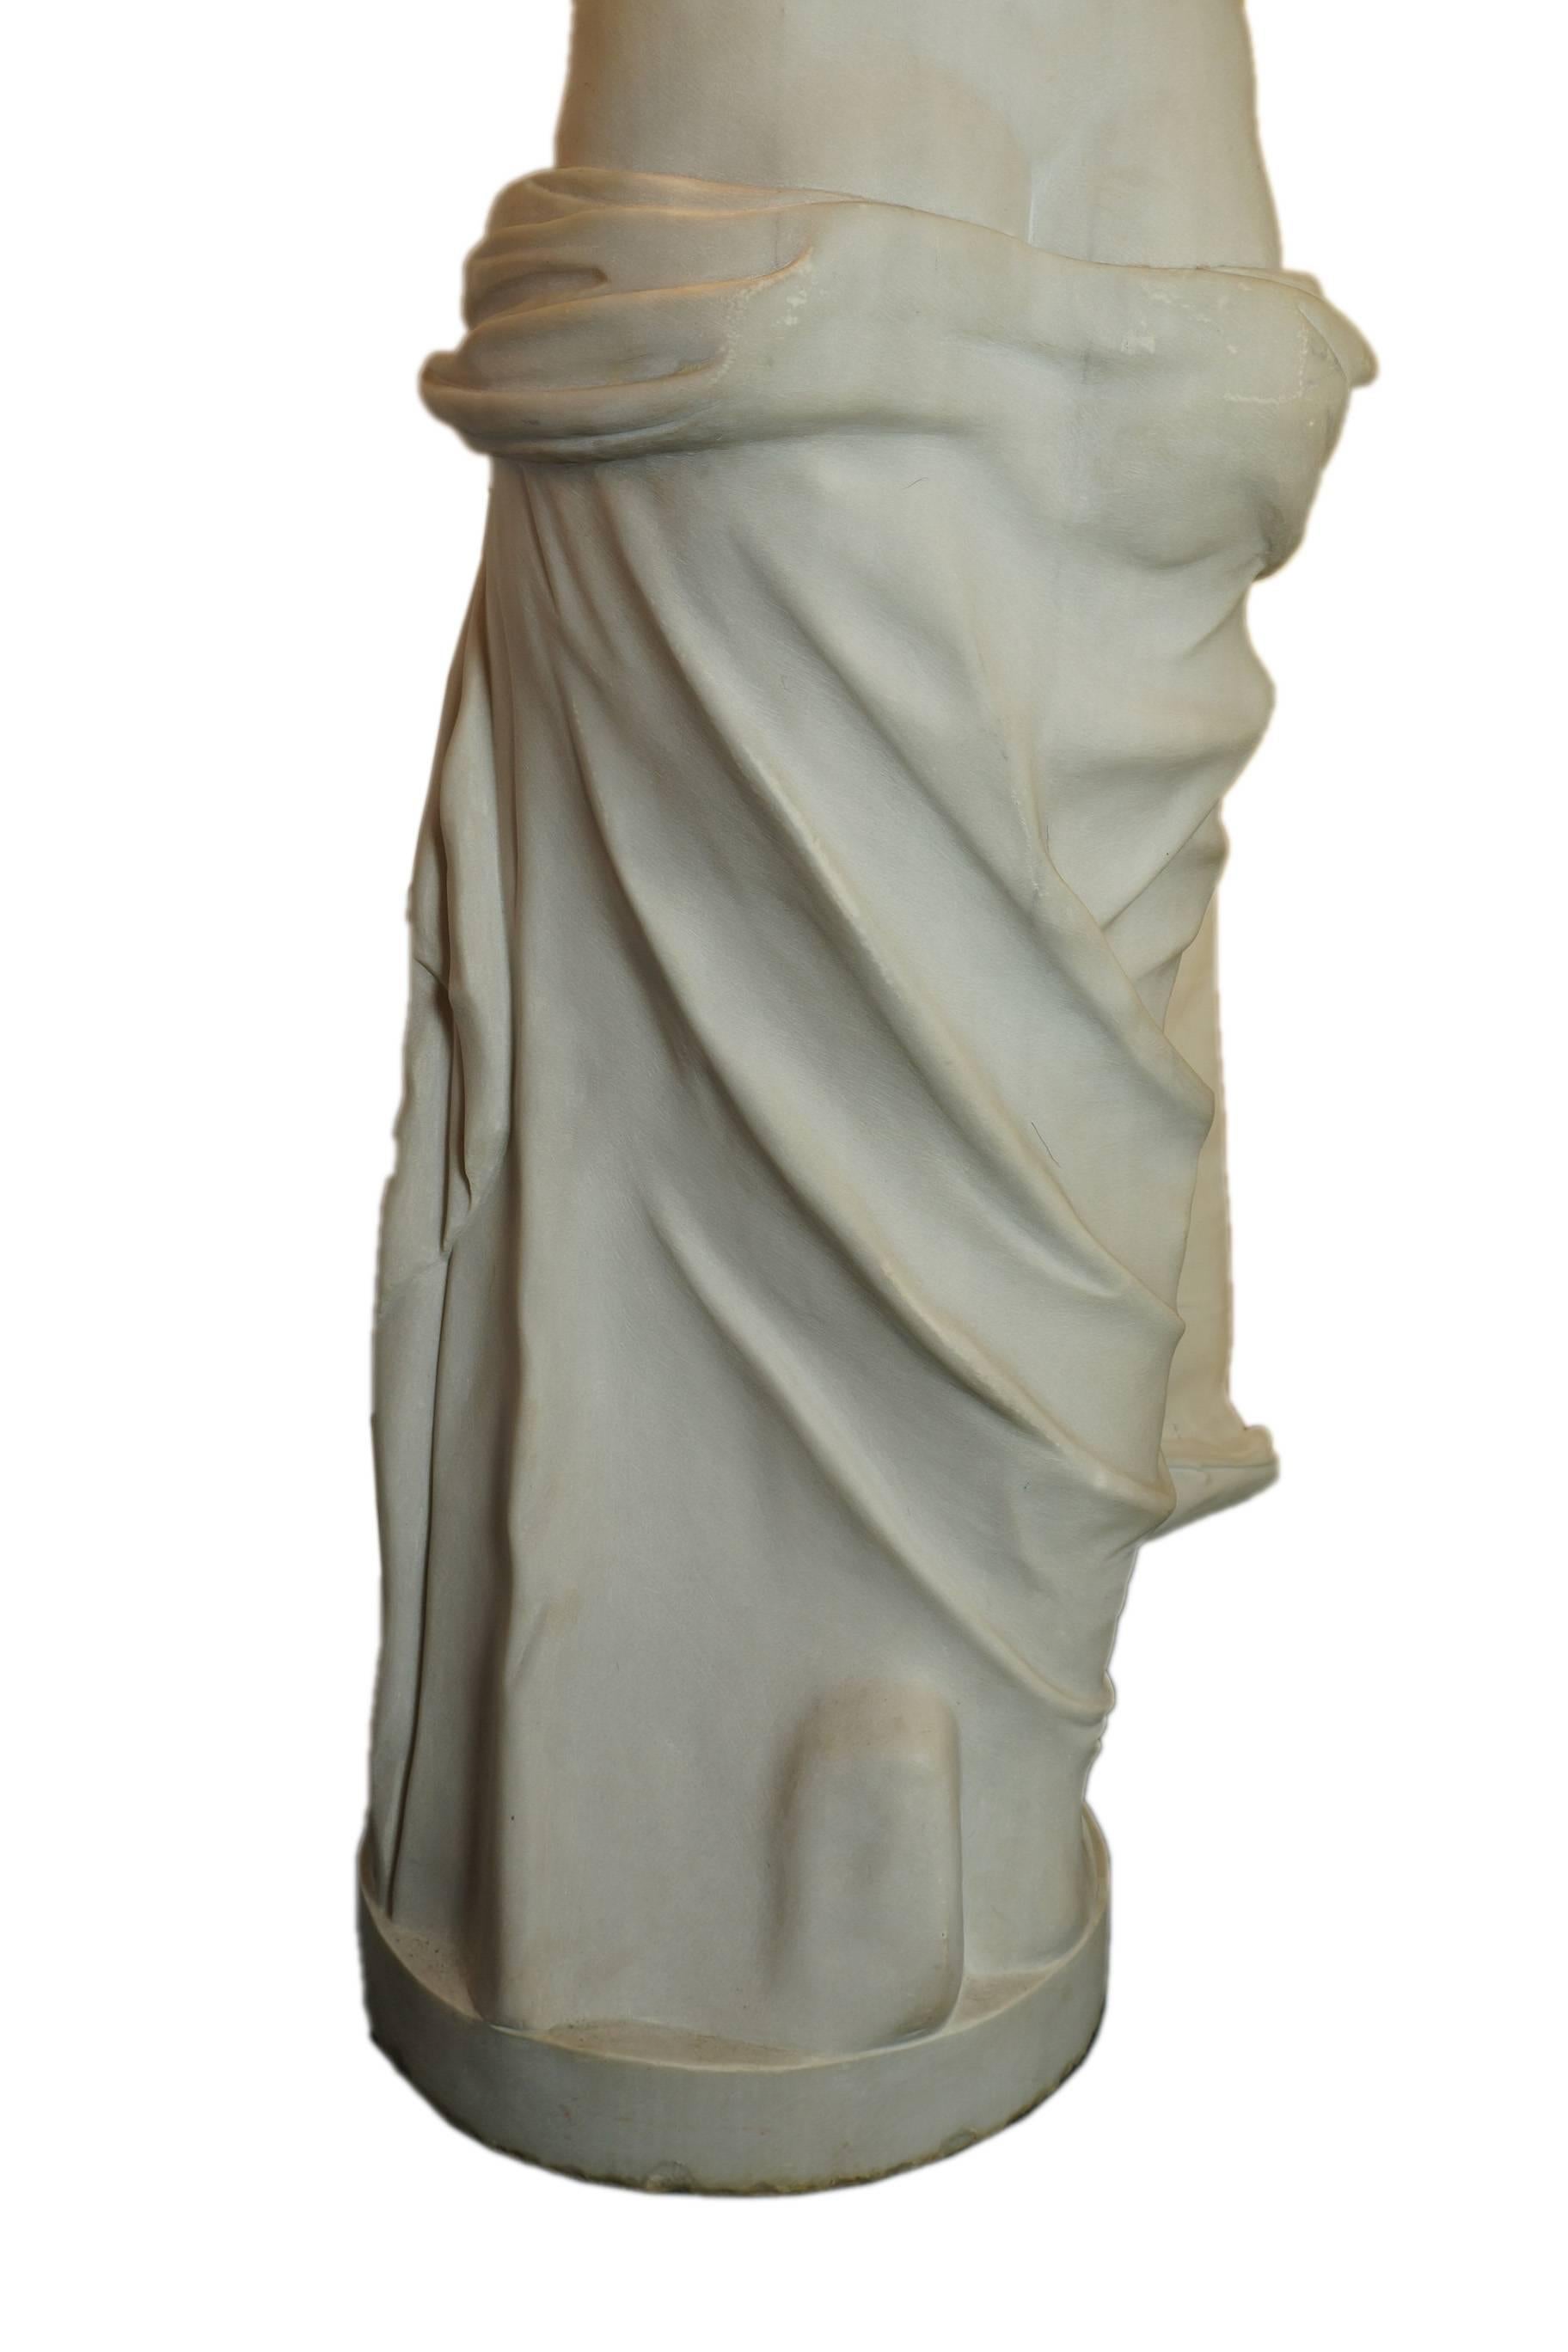 Fine Carved Italian White Marble Figure Statue of a Neoclassical Standing Nude 2